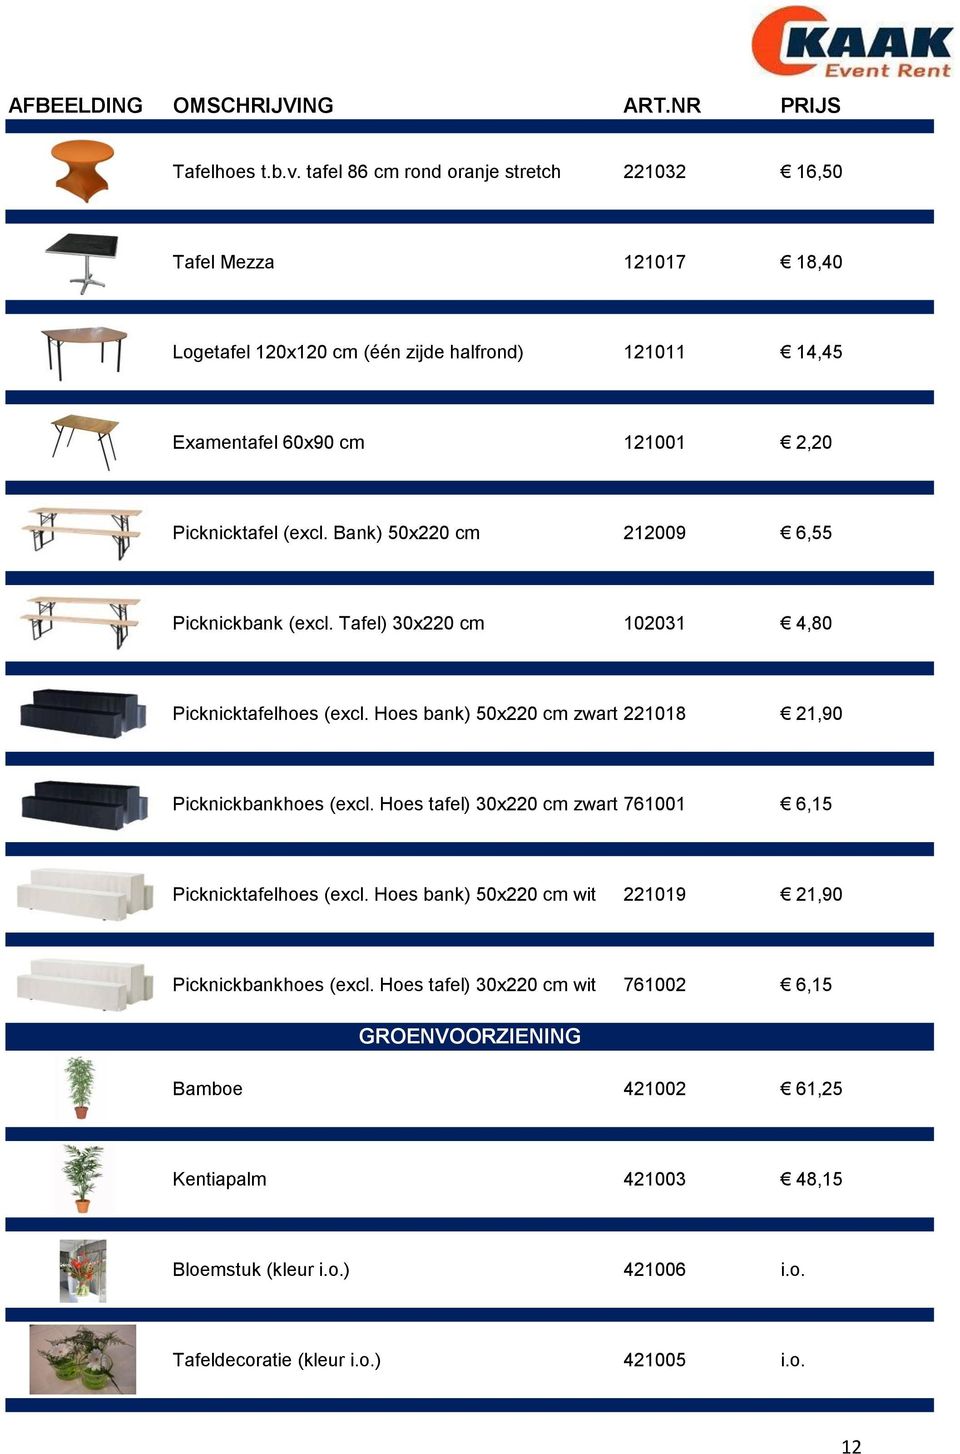 (excl. Bank) 50x220 cm 212009 6,55 Picknickbank (excl. Tafel) 30x220 cm 102031 4,80 Picknicktafelhoes (excl. Hoes bank) 50x220 cm zwart 221018 21,90 Picknickbankhoes (excl.